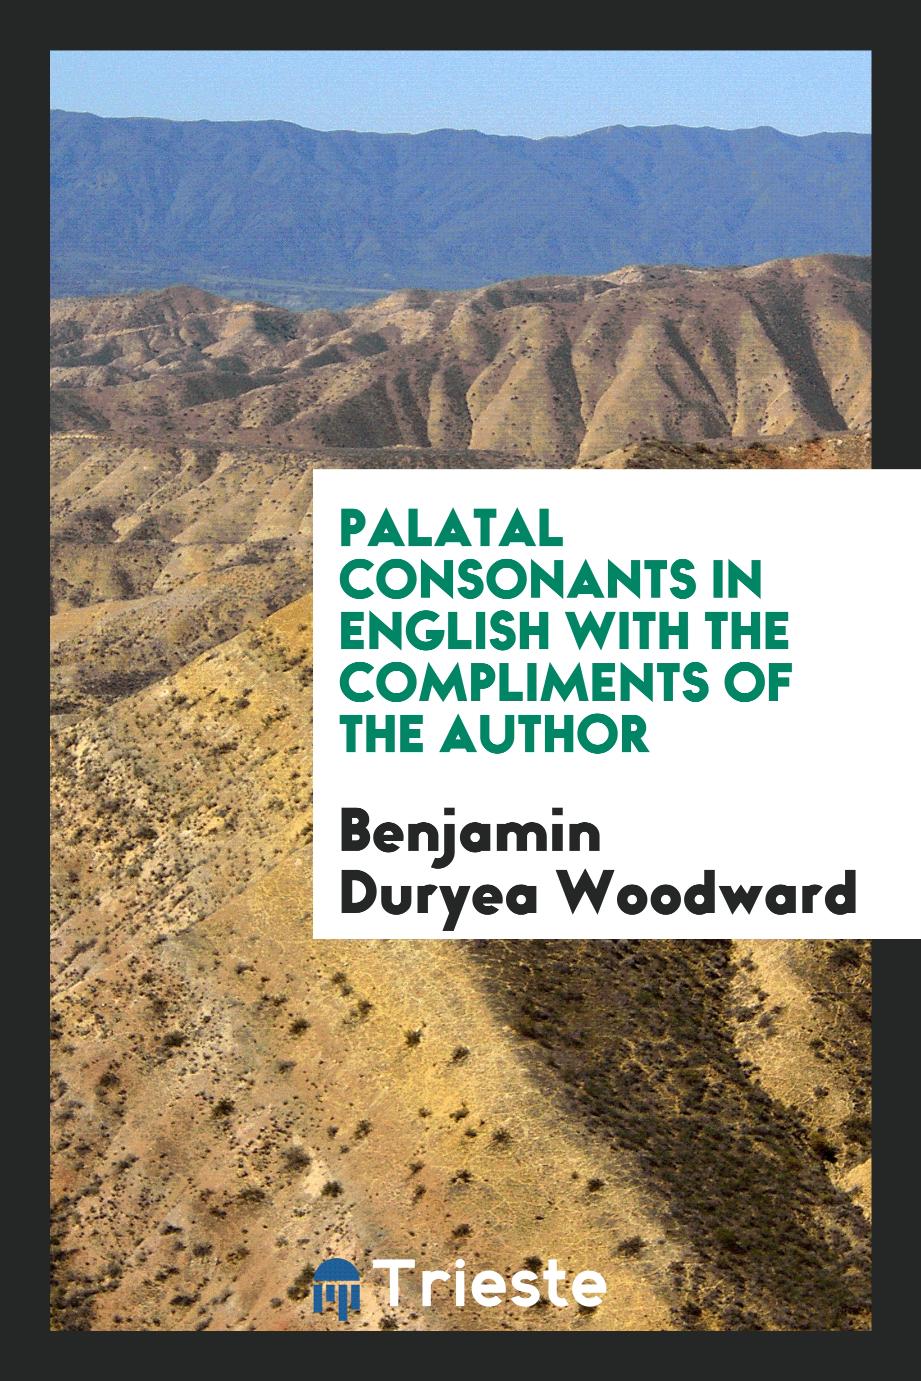 Palatal Consonants in English with the compliments of the author